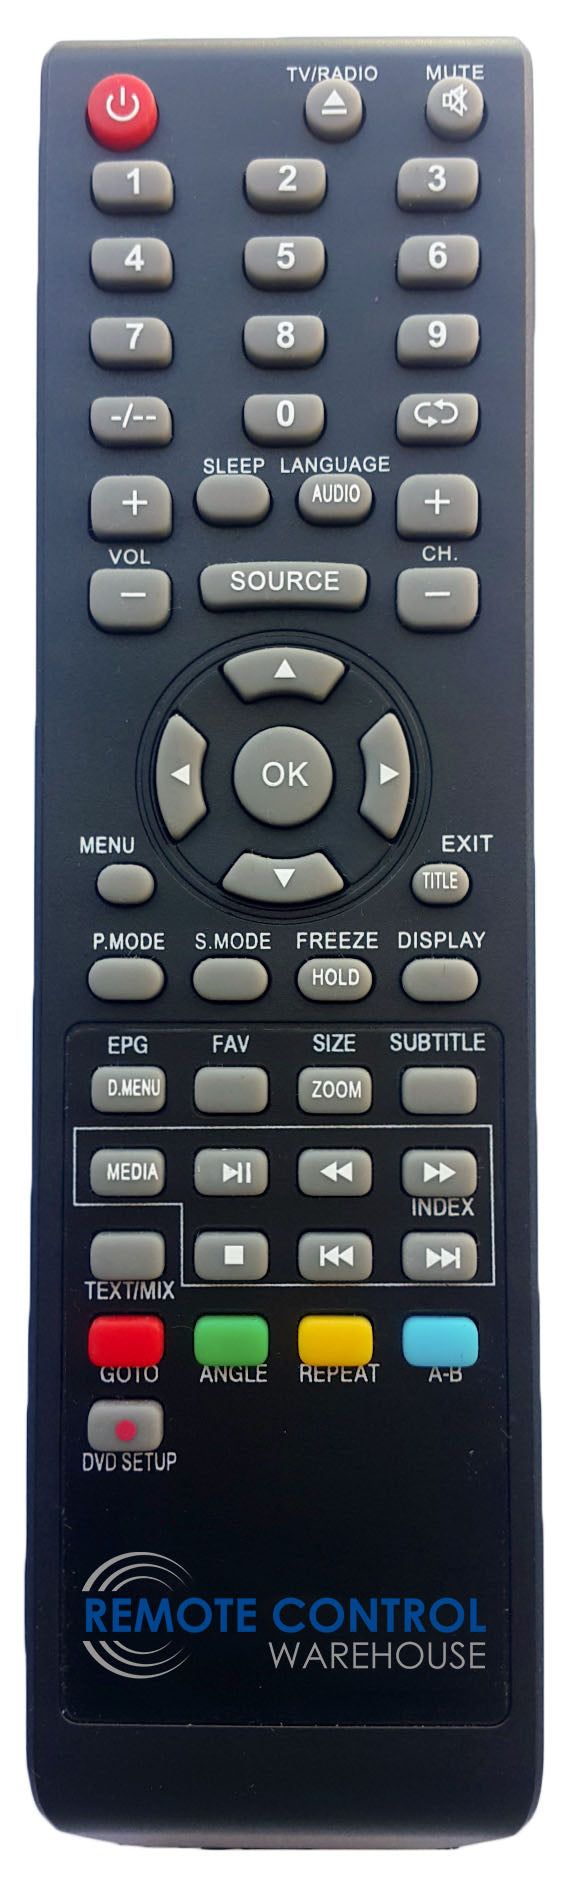 REPLACEMENT BAUHN REMOTE CONTROL SUBSTITUTE   ATV-40FHDED  ATV40FHDED  TV - Remote Control Warehouse